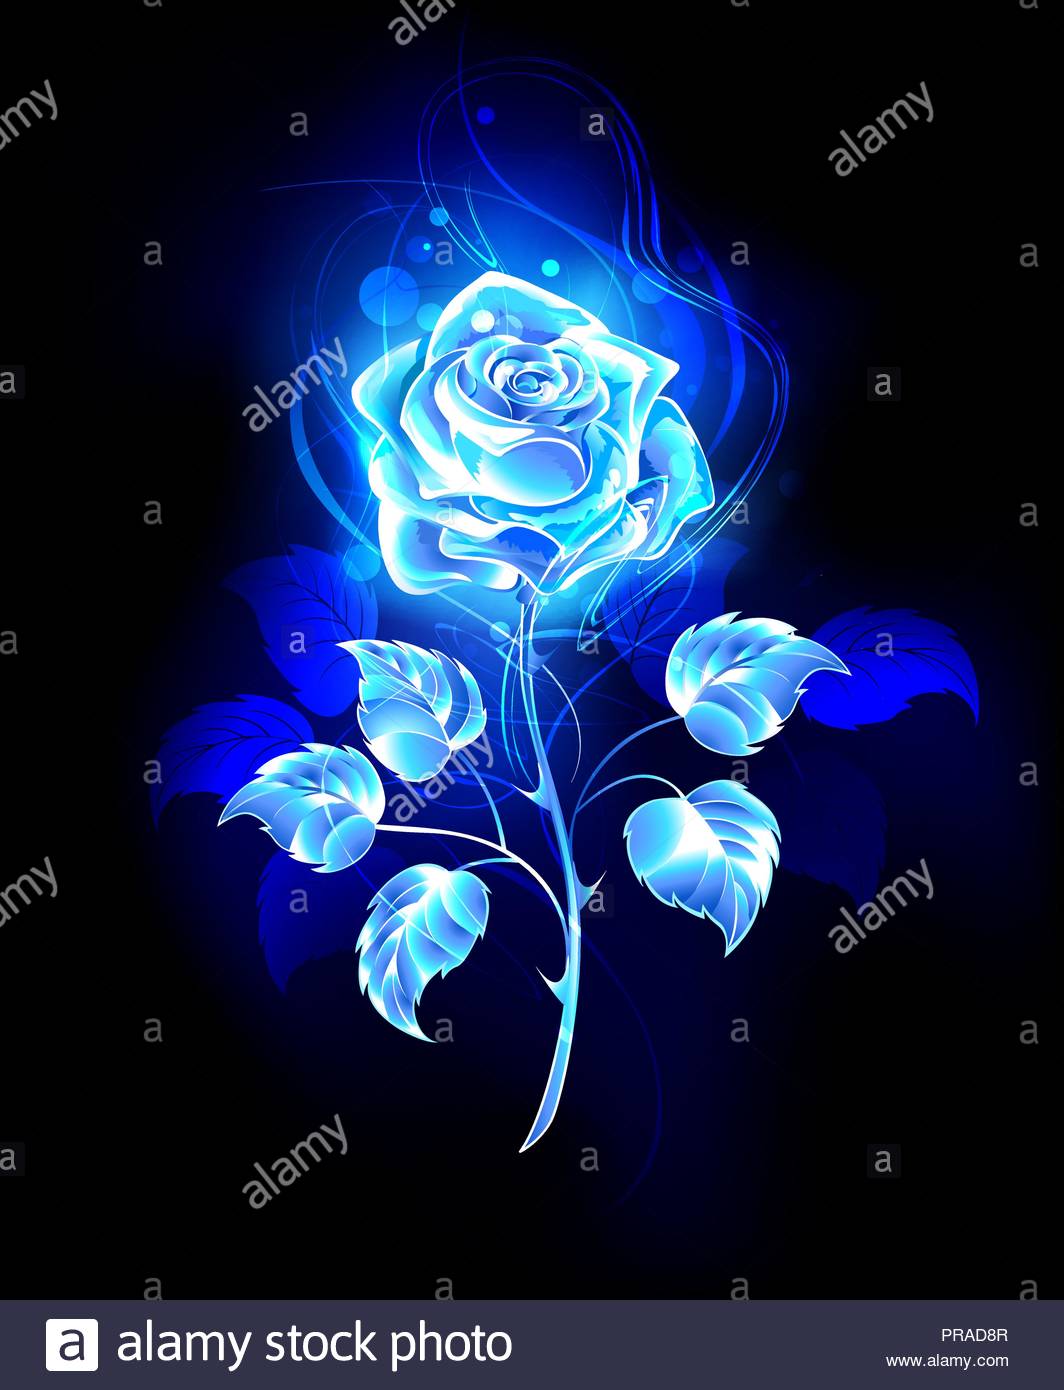 Blooming Abstract Rose From Blue Flame On Black Background Stock